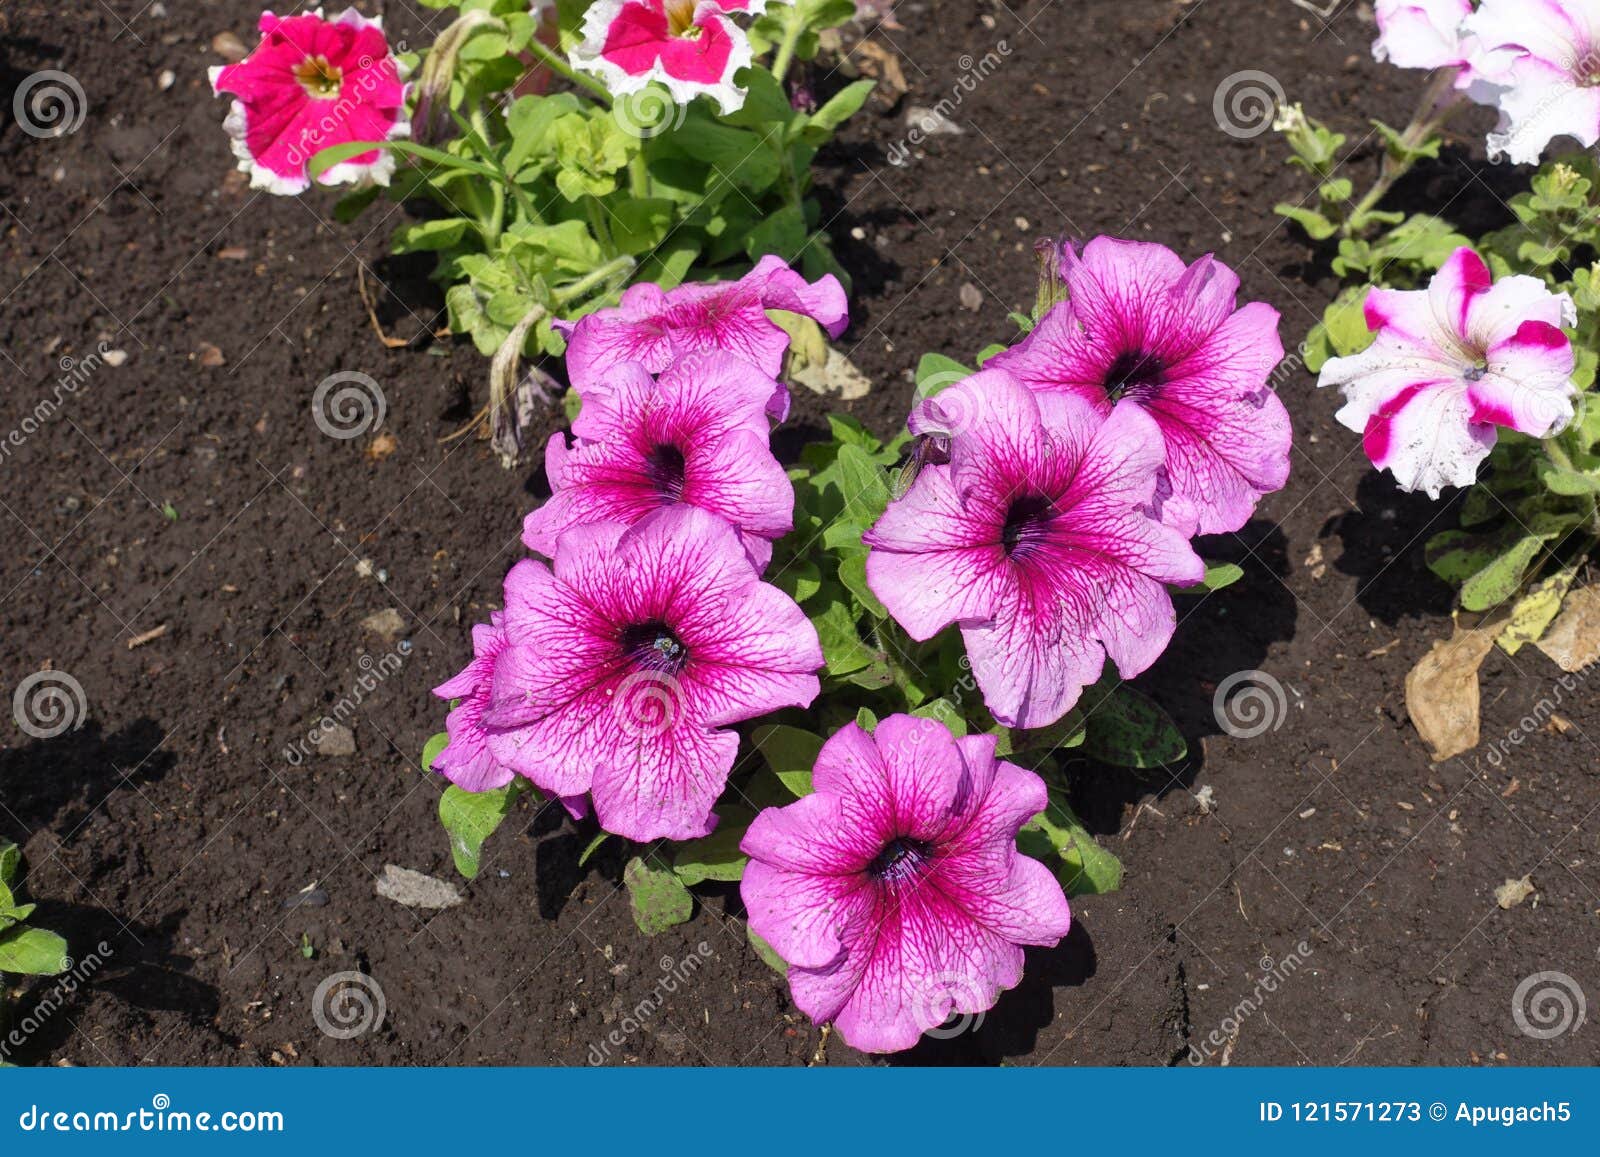 florescence of pink petunias in may